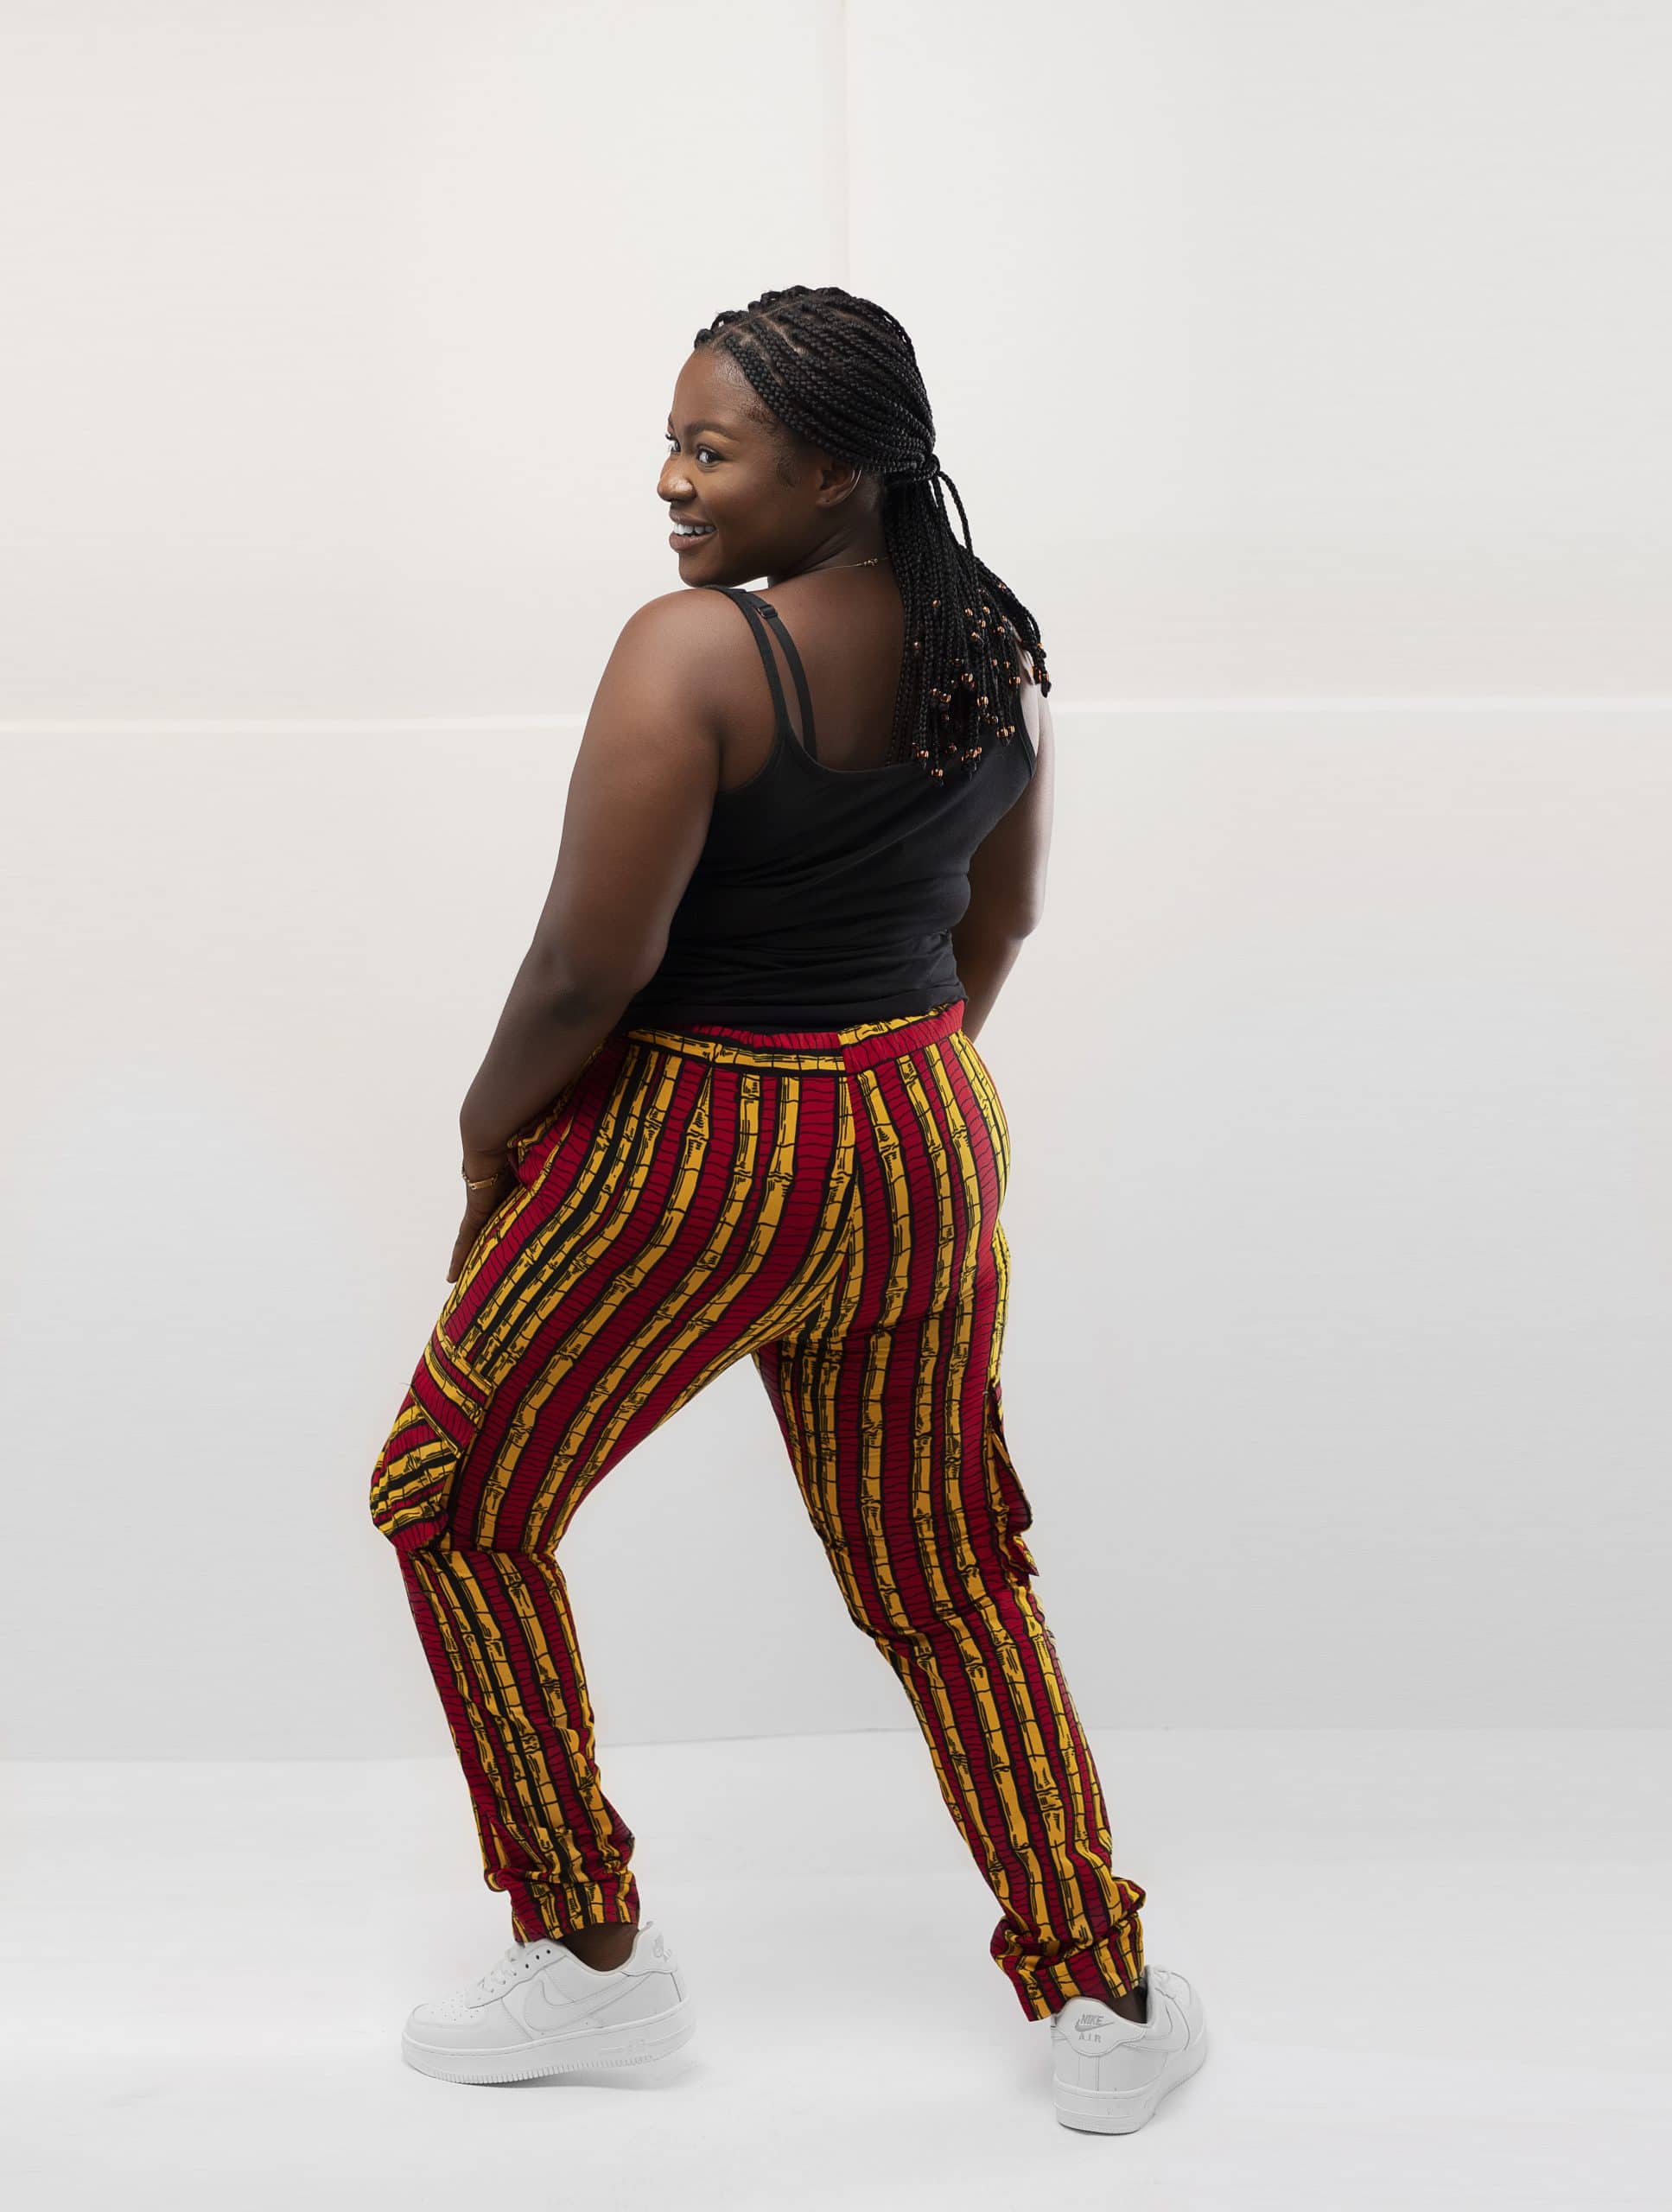 Back shot of model wearing our ladies Shani combat trousers or cargo pants in all over striped red and gold African print.